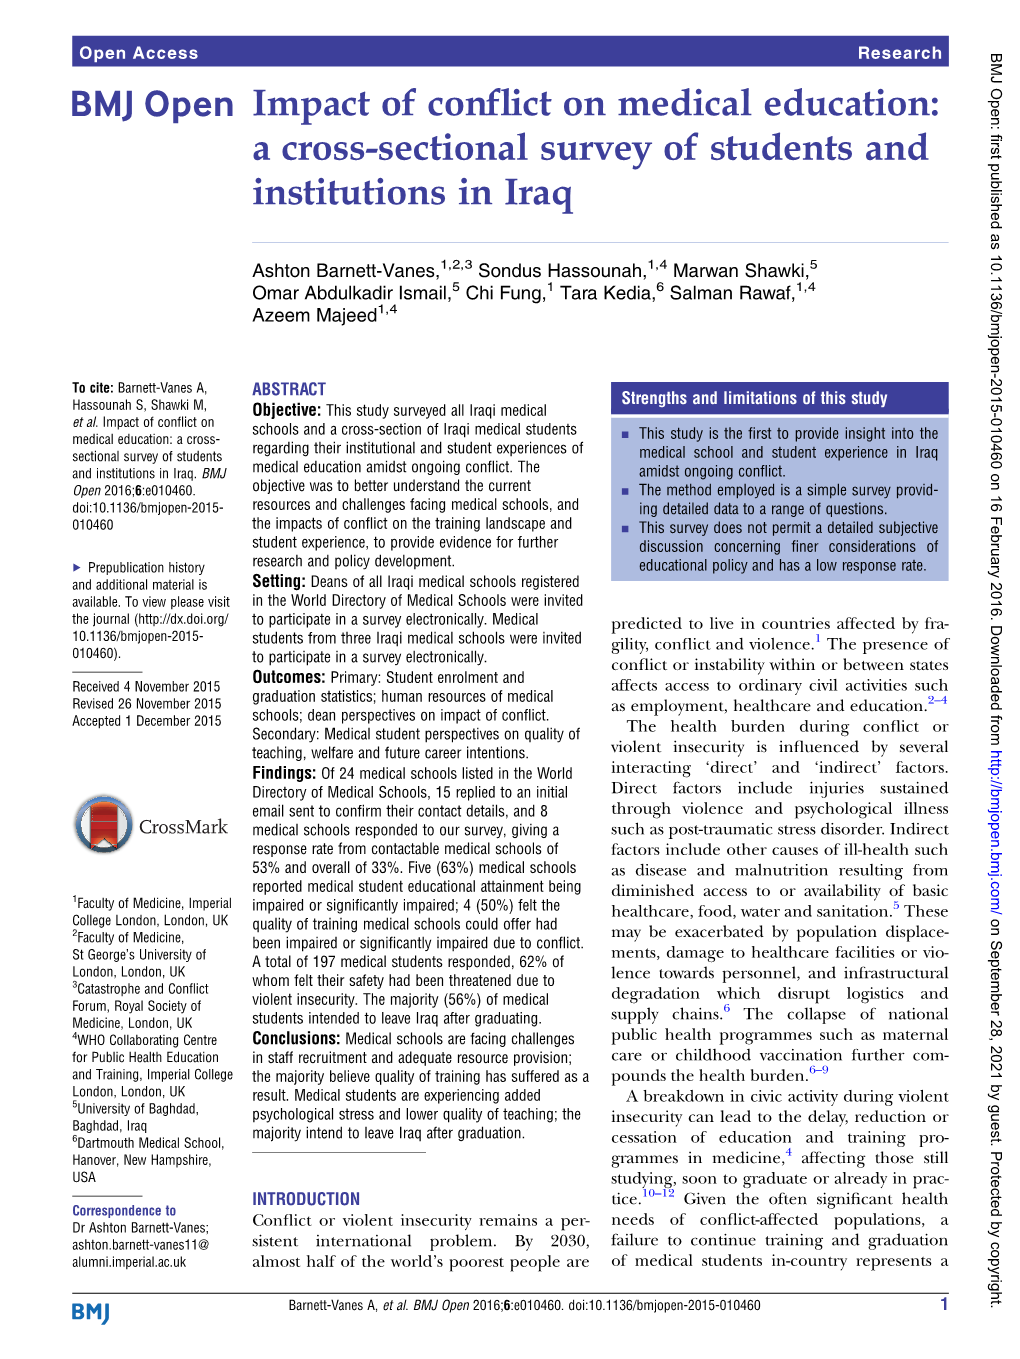 A Cross-Sectional Survey of Students and Institutions in Iraq